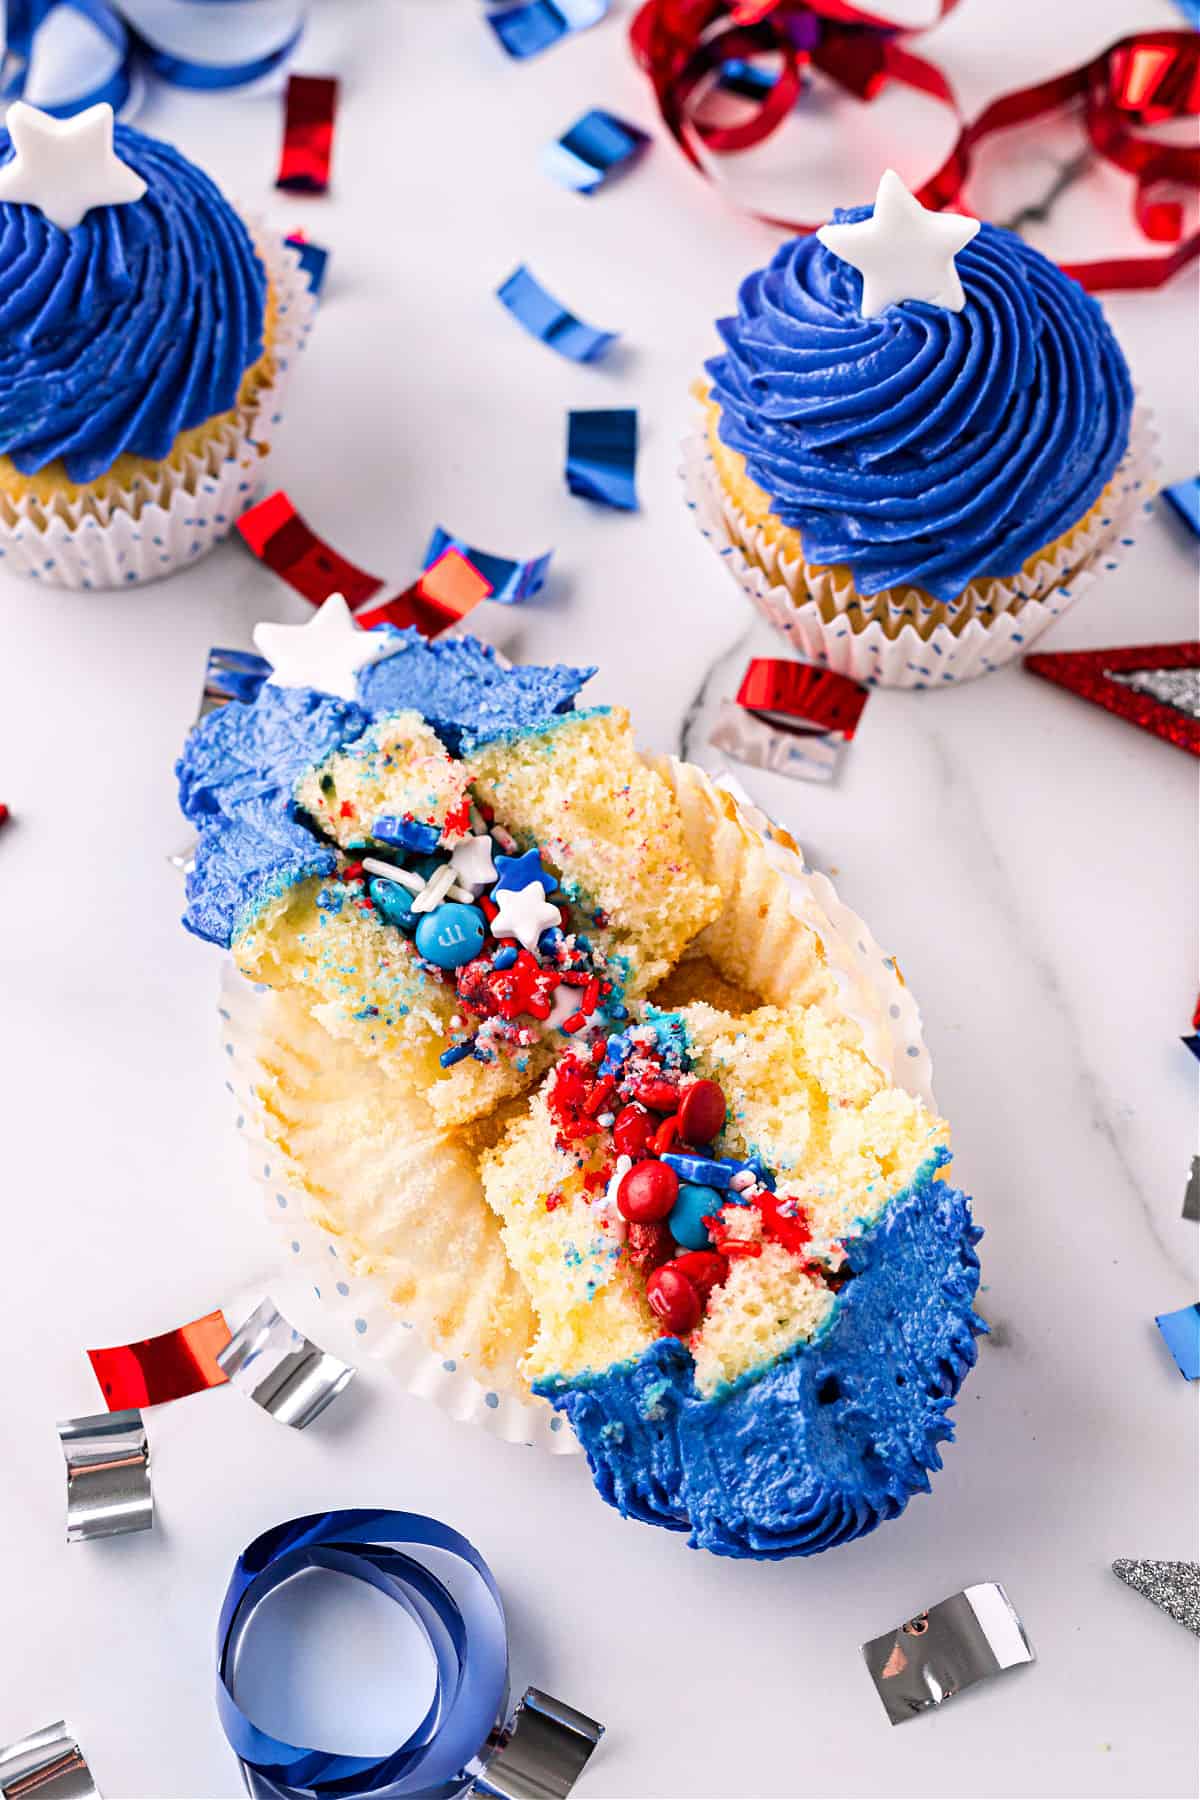 White cupcakes cut in half and filled with sprinkles.